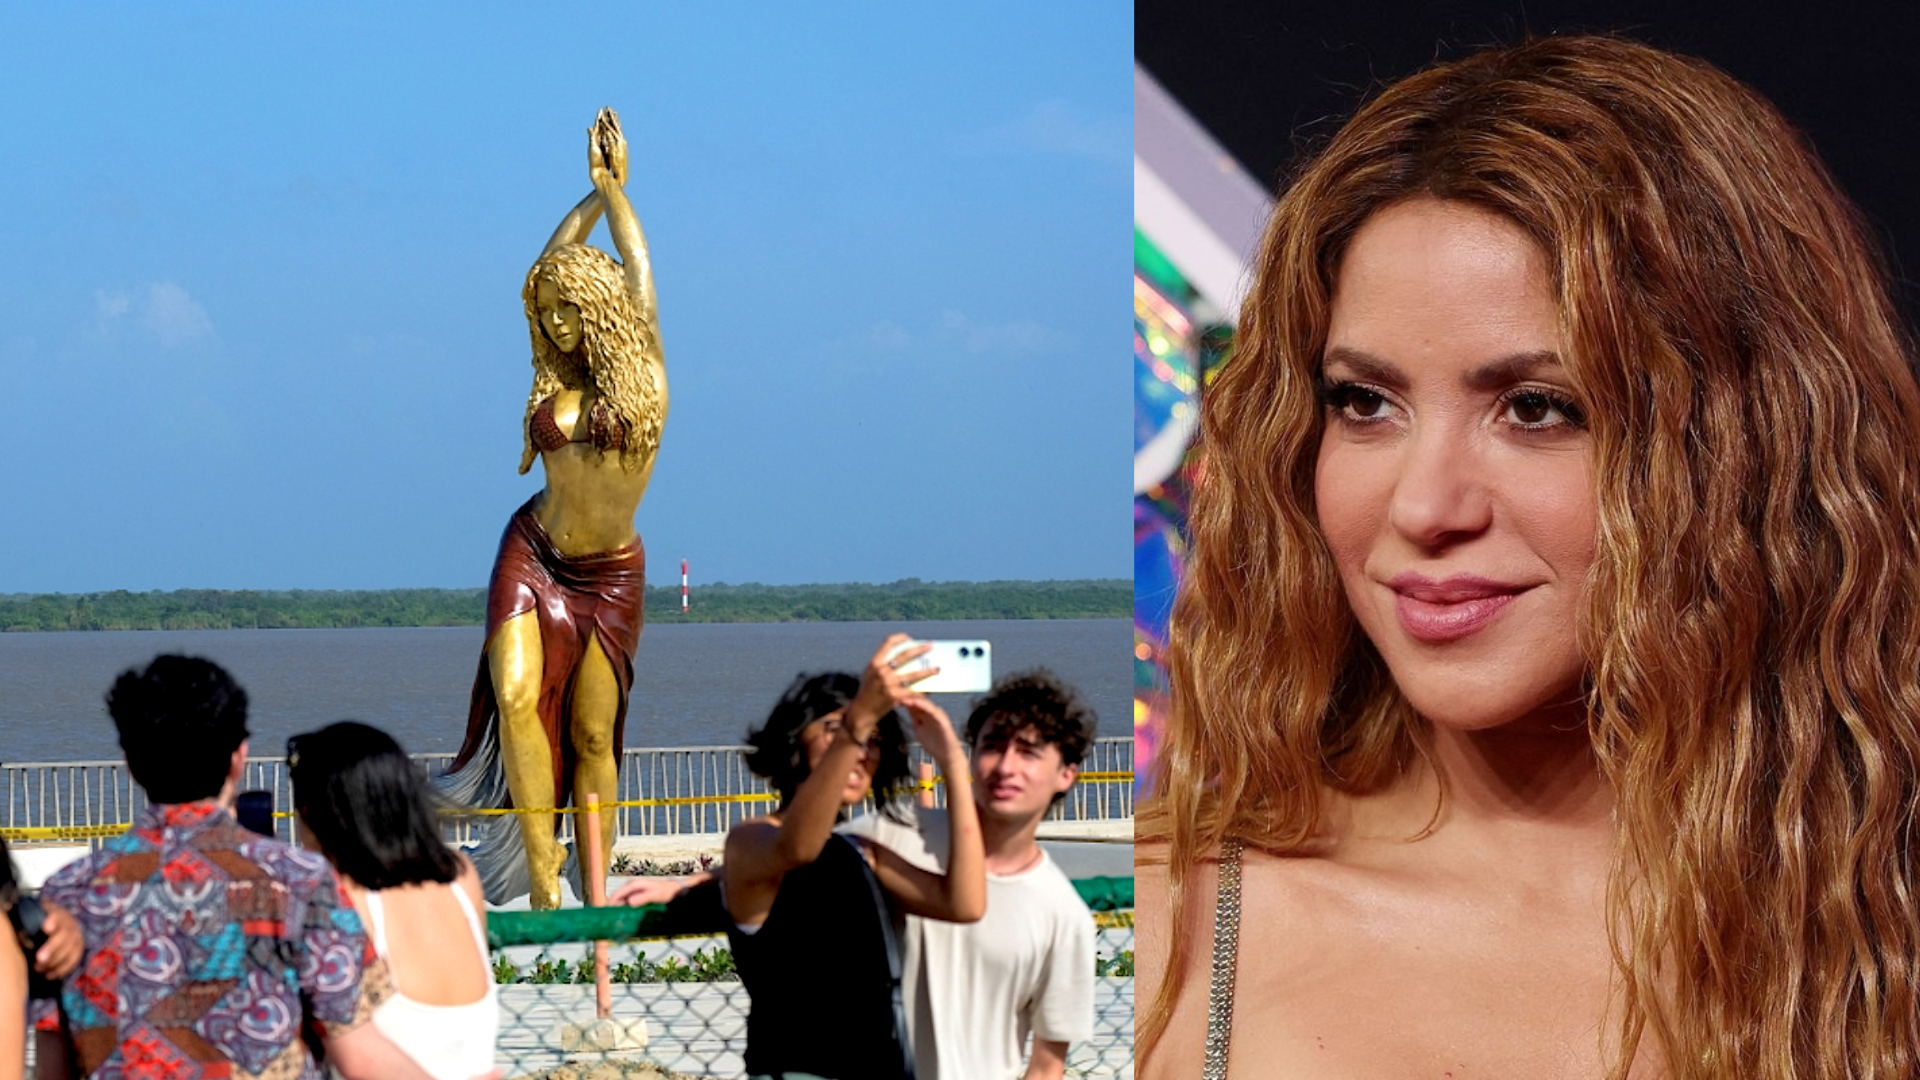 People pose for photos next to statue of Shakira at Gran Malecon in Barranquilla, Colombia.